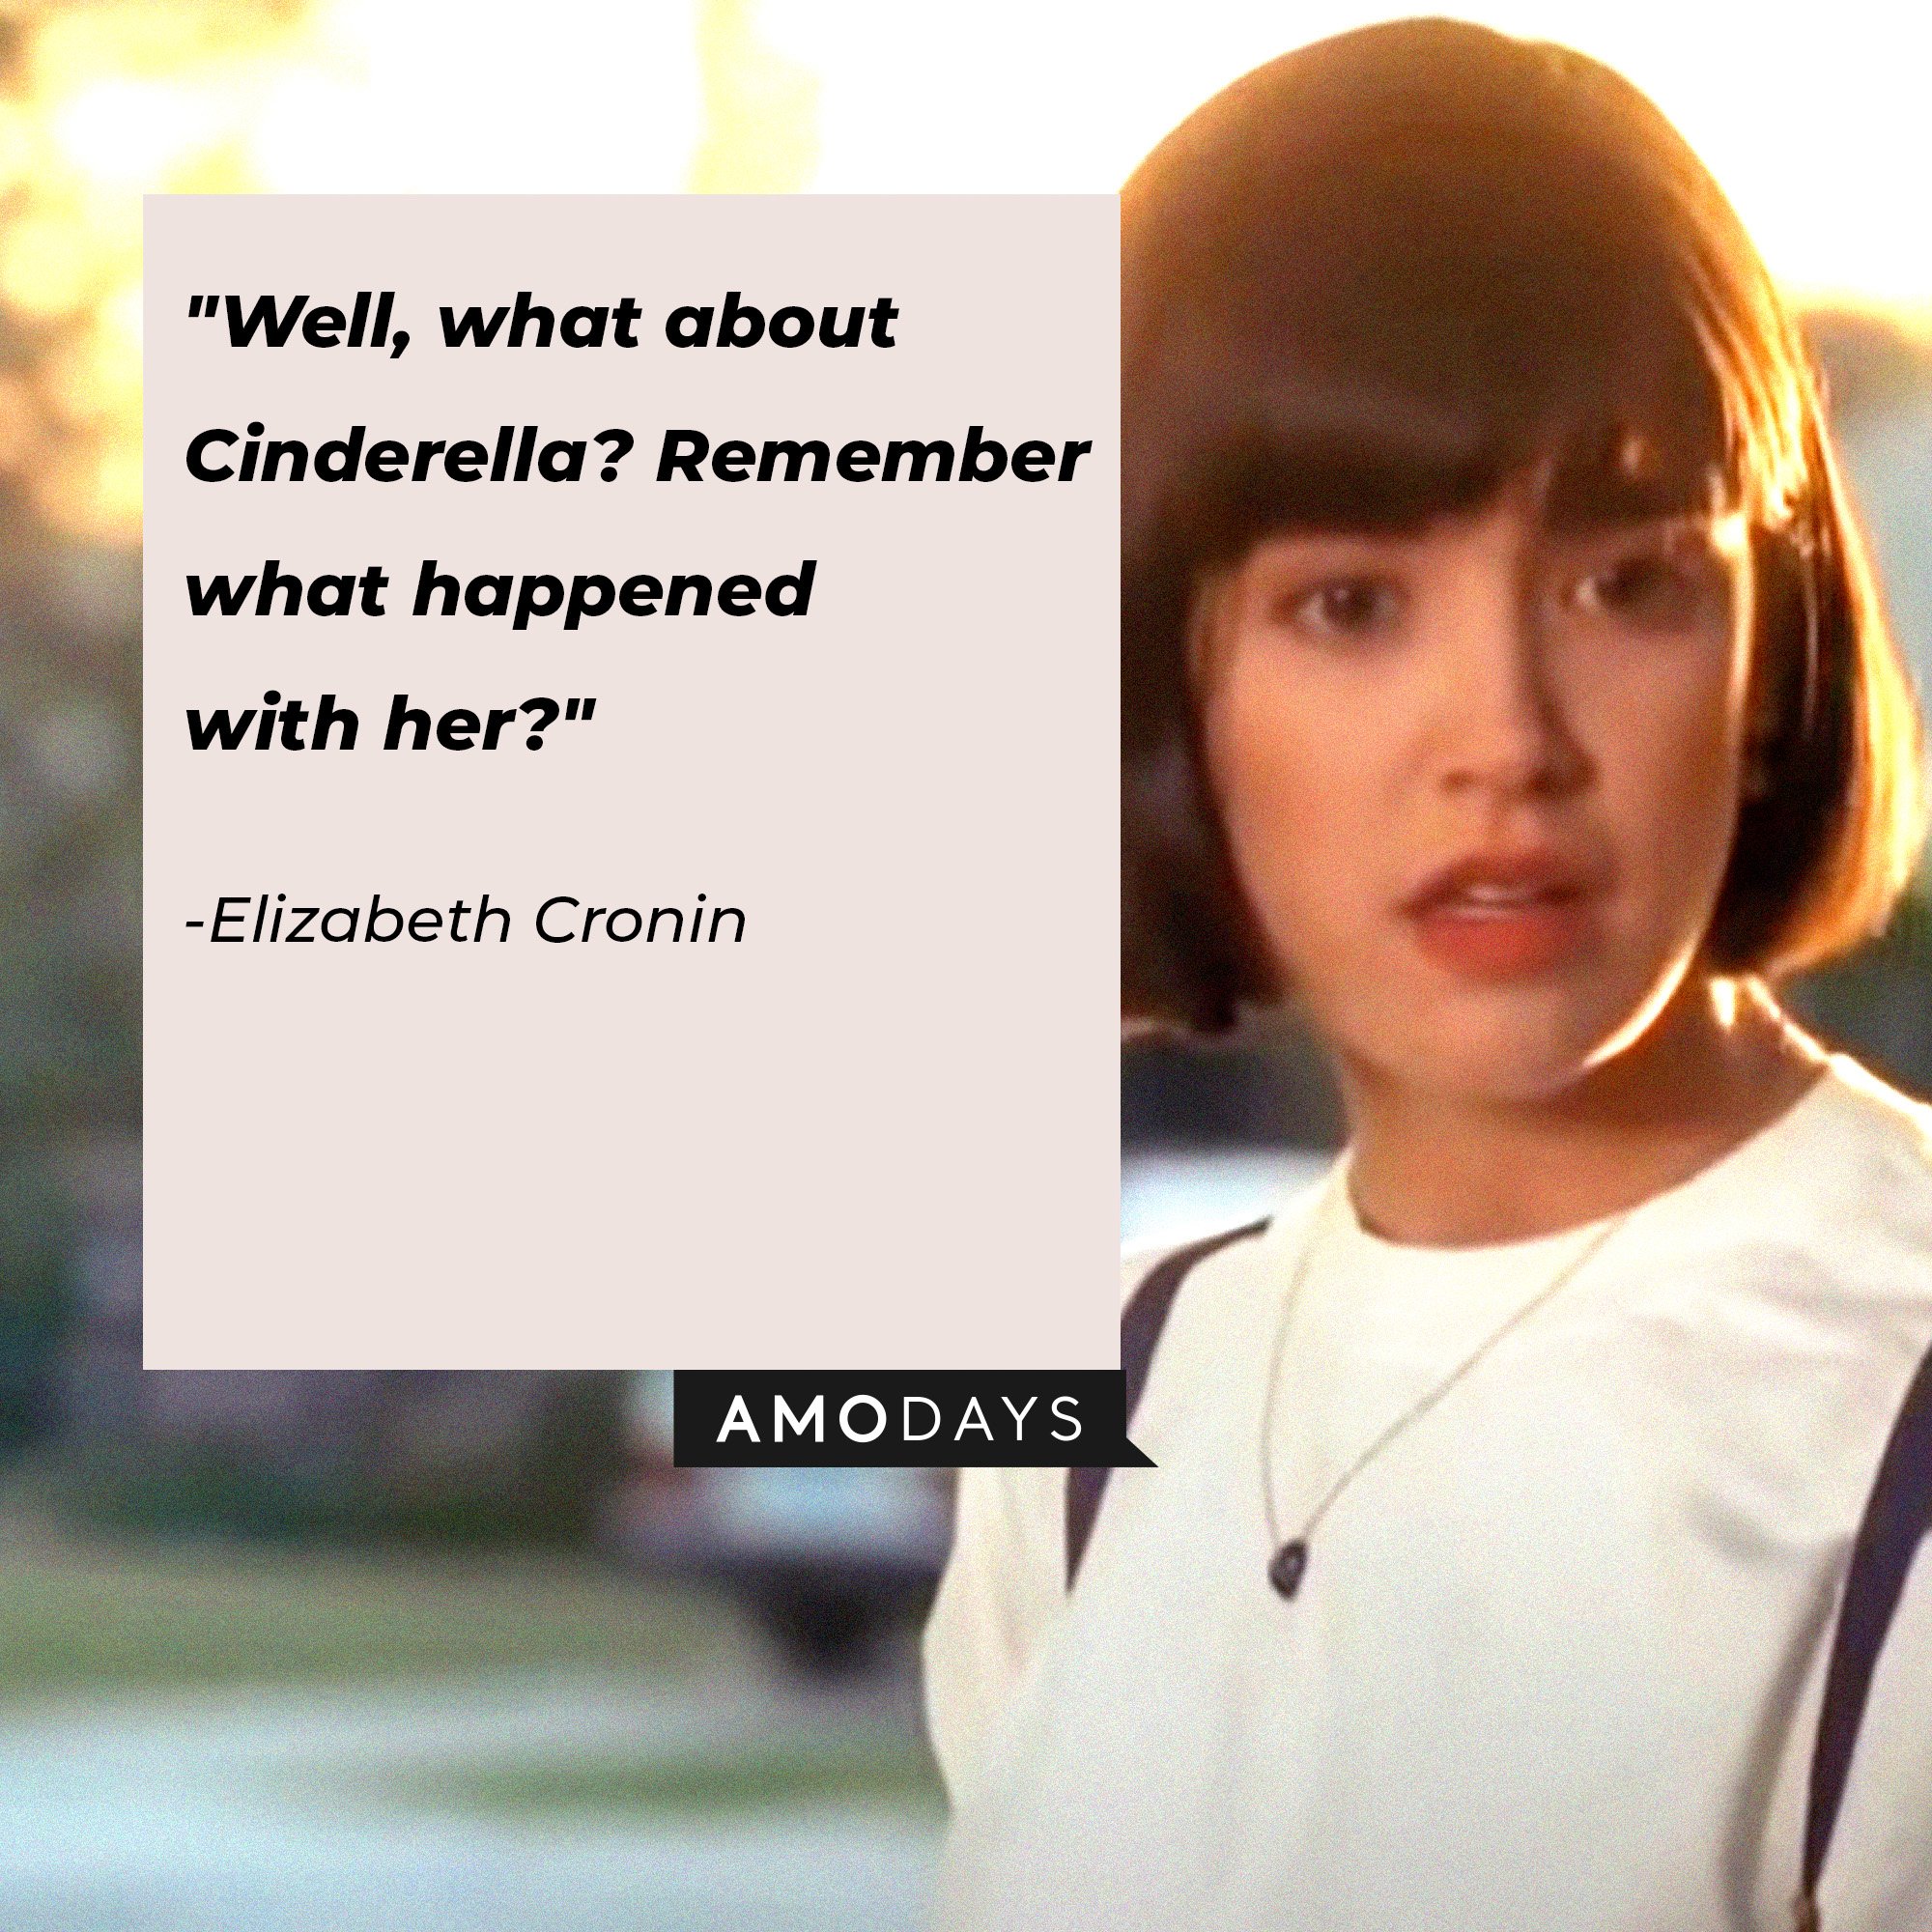 Elizabeth Cronin’s quote: "Well, what about Cinderella? Remember what happened with her?" | Image: AmoDays